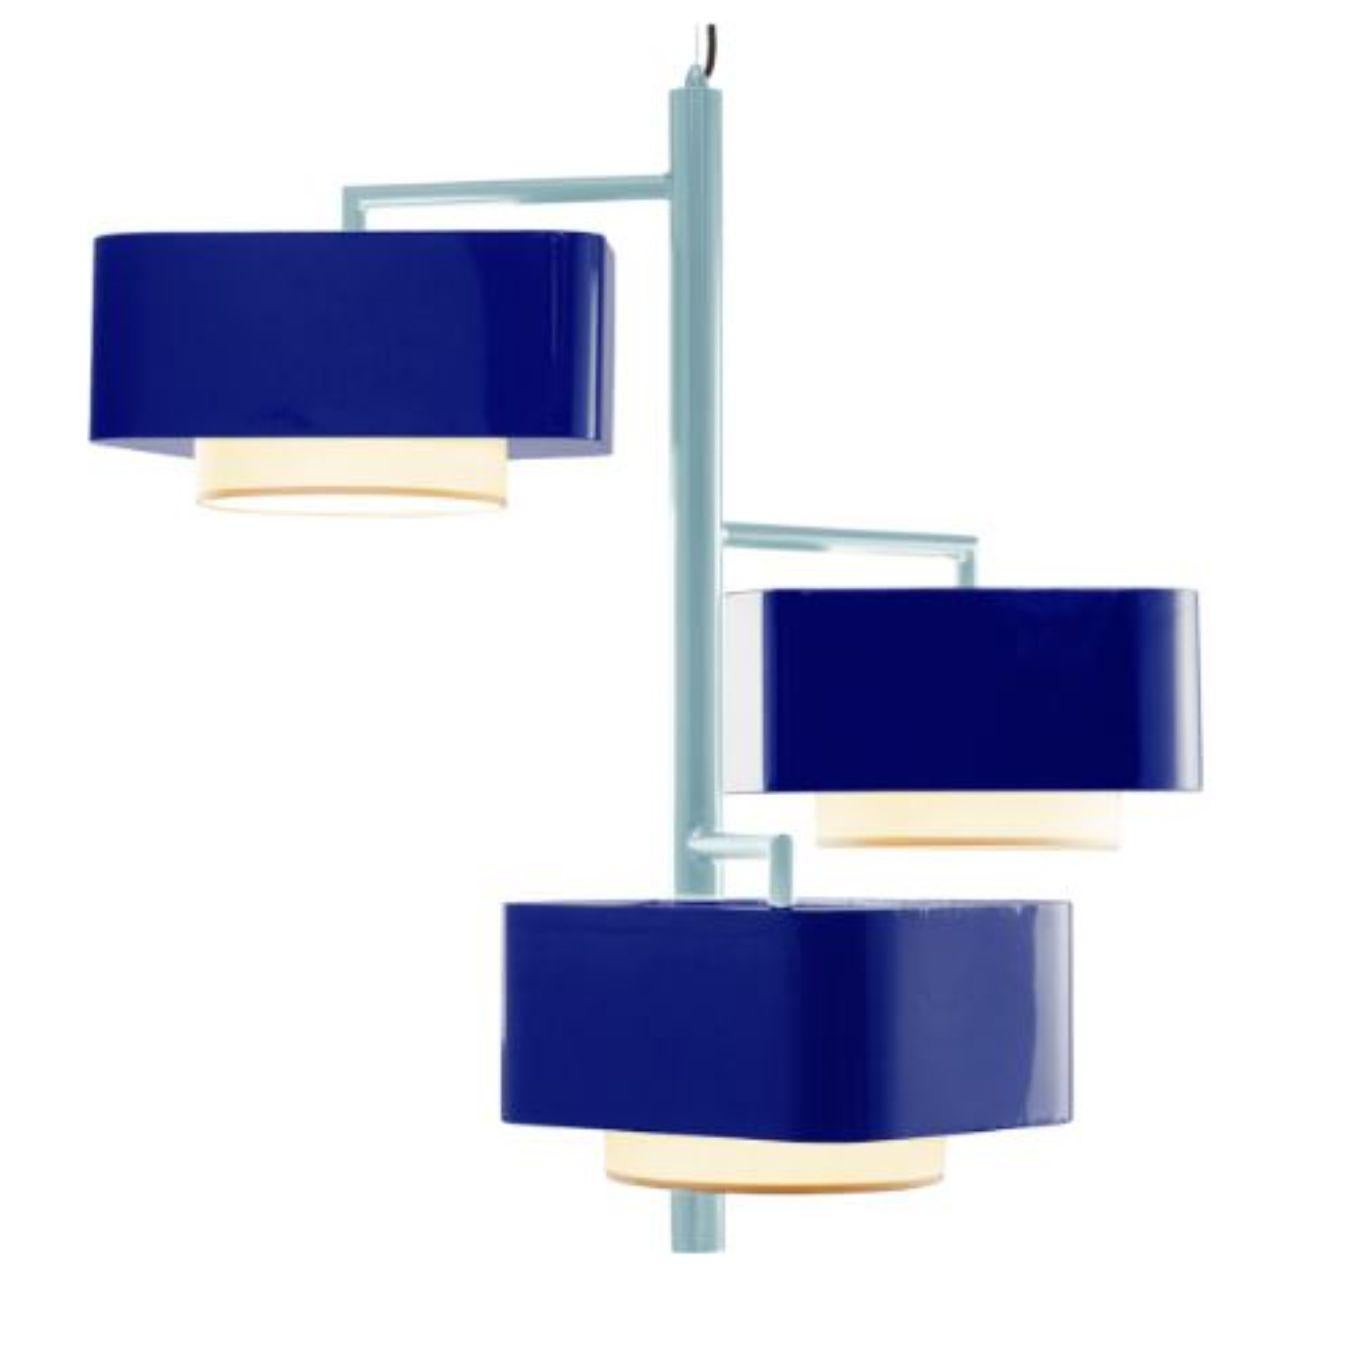 Jade and Cobalt Carousel I suspension lamp by Dooq
Dimensions: W 97 x D 97 x H 86 cm
Materials: lacquered metal.
abat-jour: cotton
Also available in different colors.

Information:
230V/50Hz
E27/3x20W LED
120V/60Hz
E26/3x15W LED
bulbs not